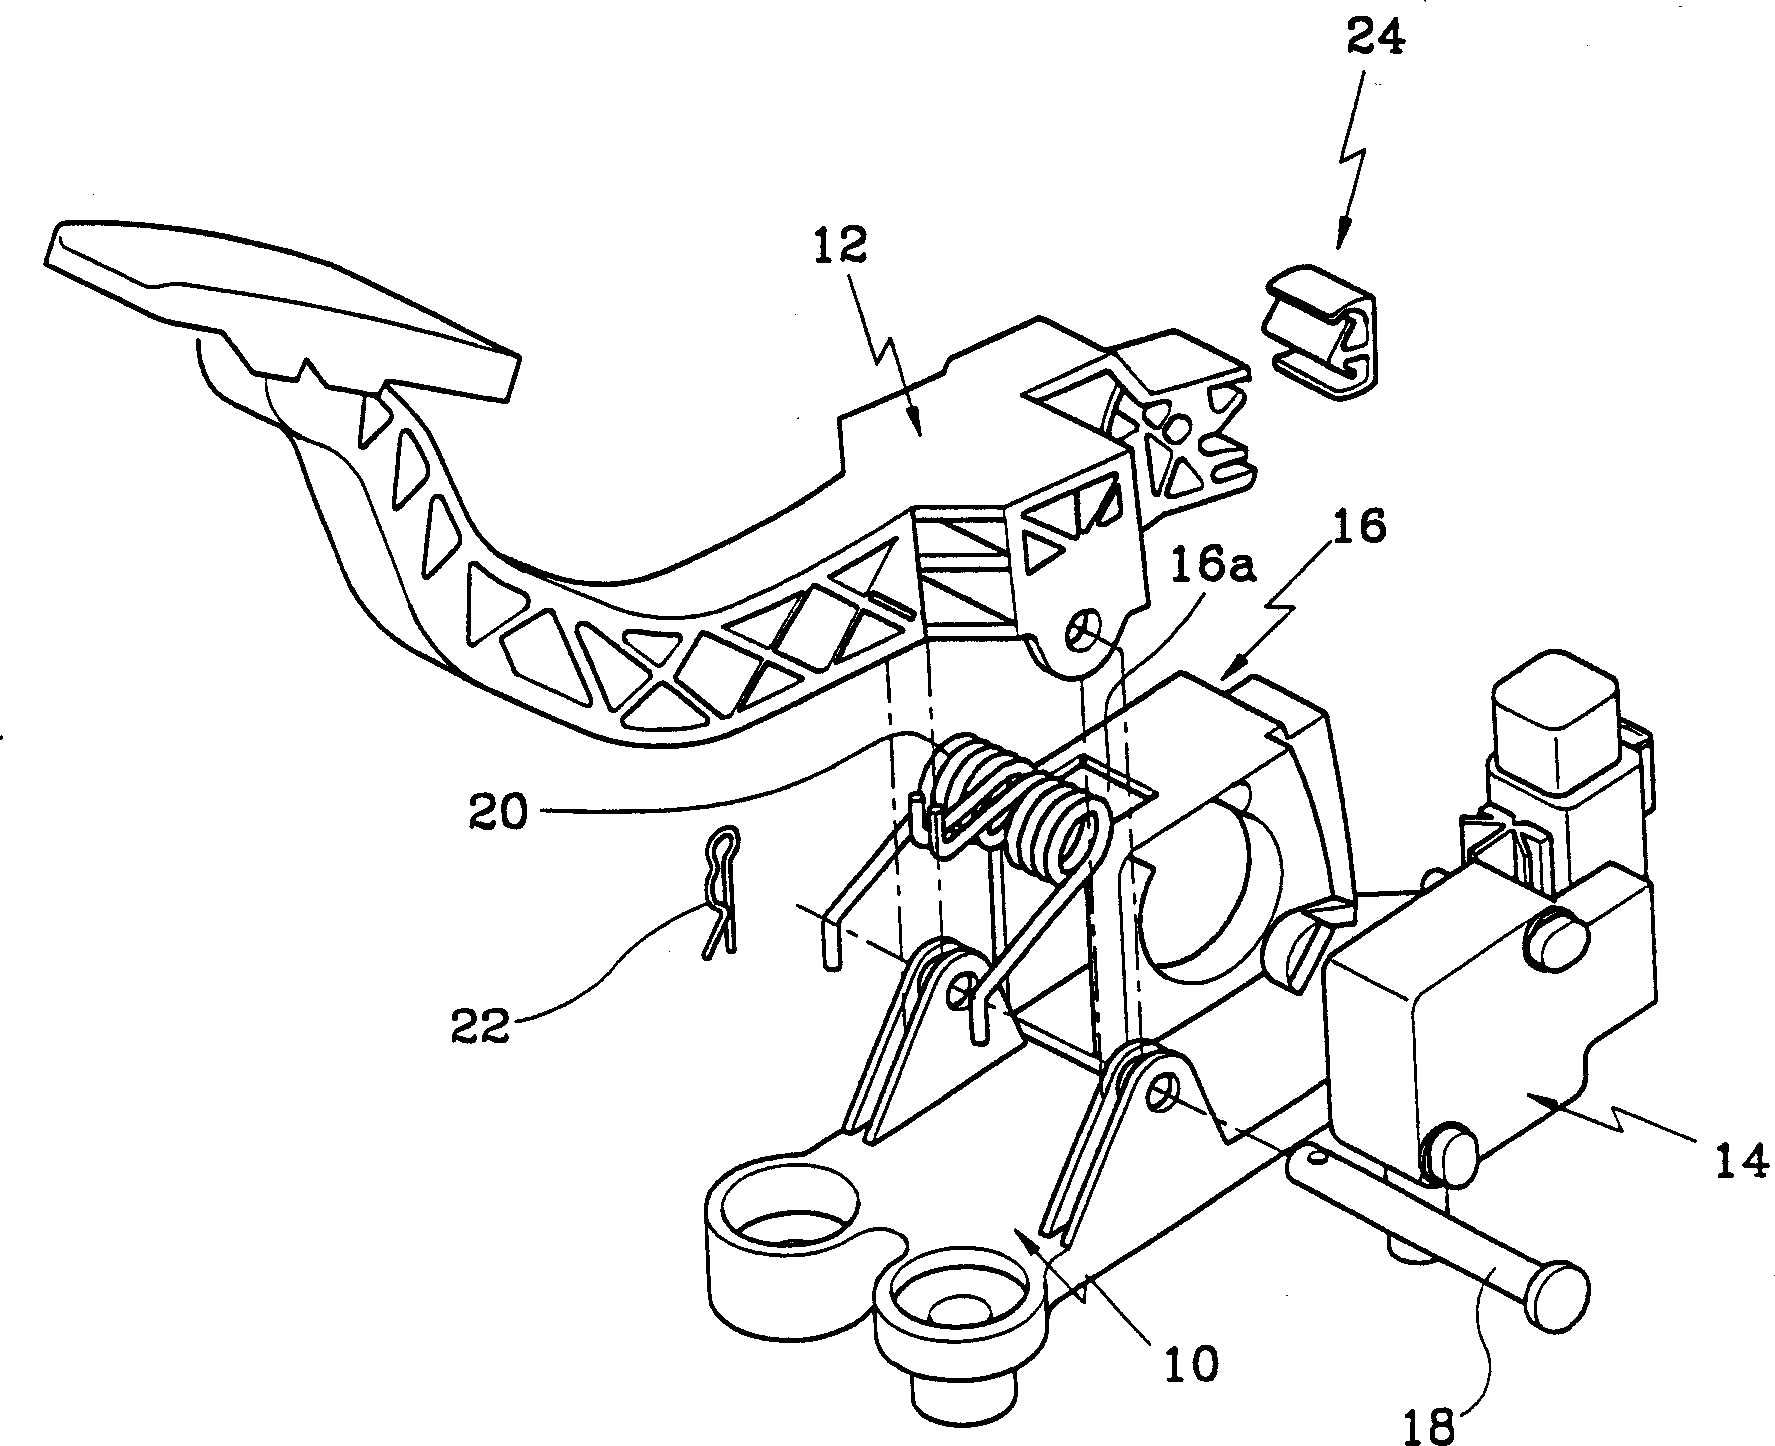 Electronic accelerating pedal system with Legs strength regulating funtion